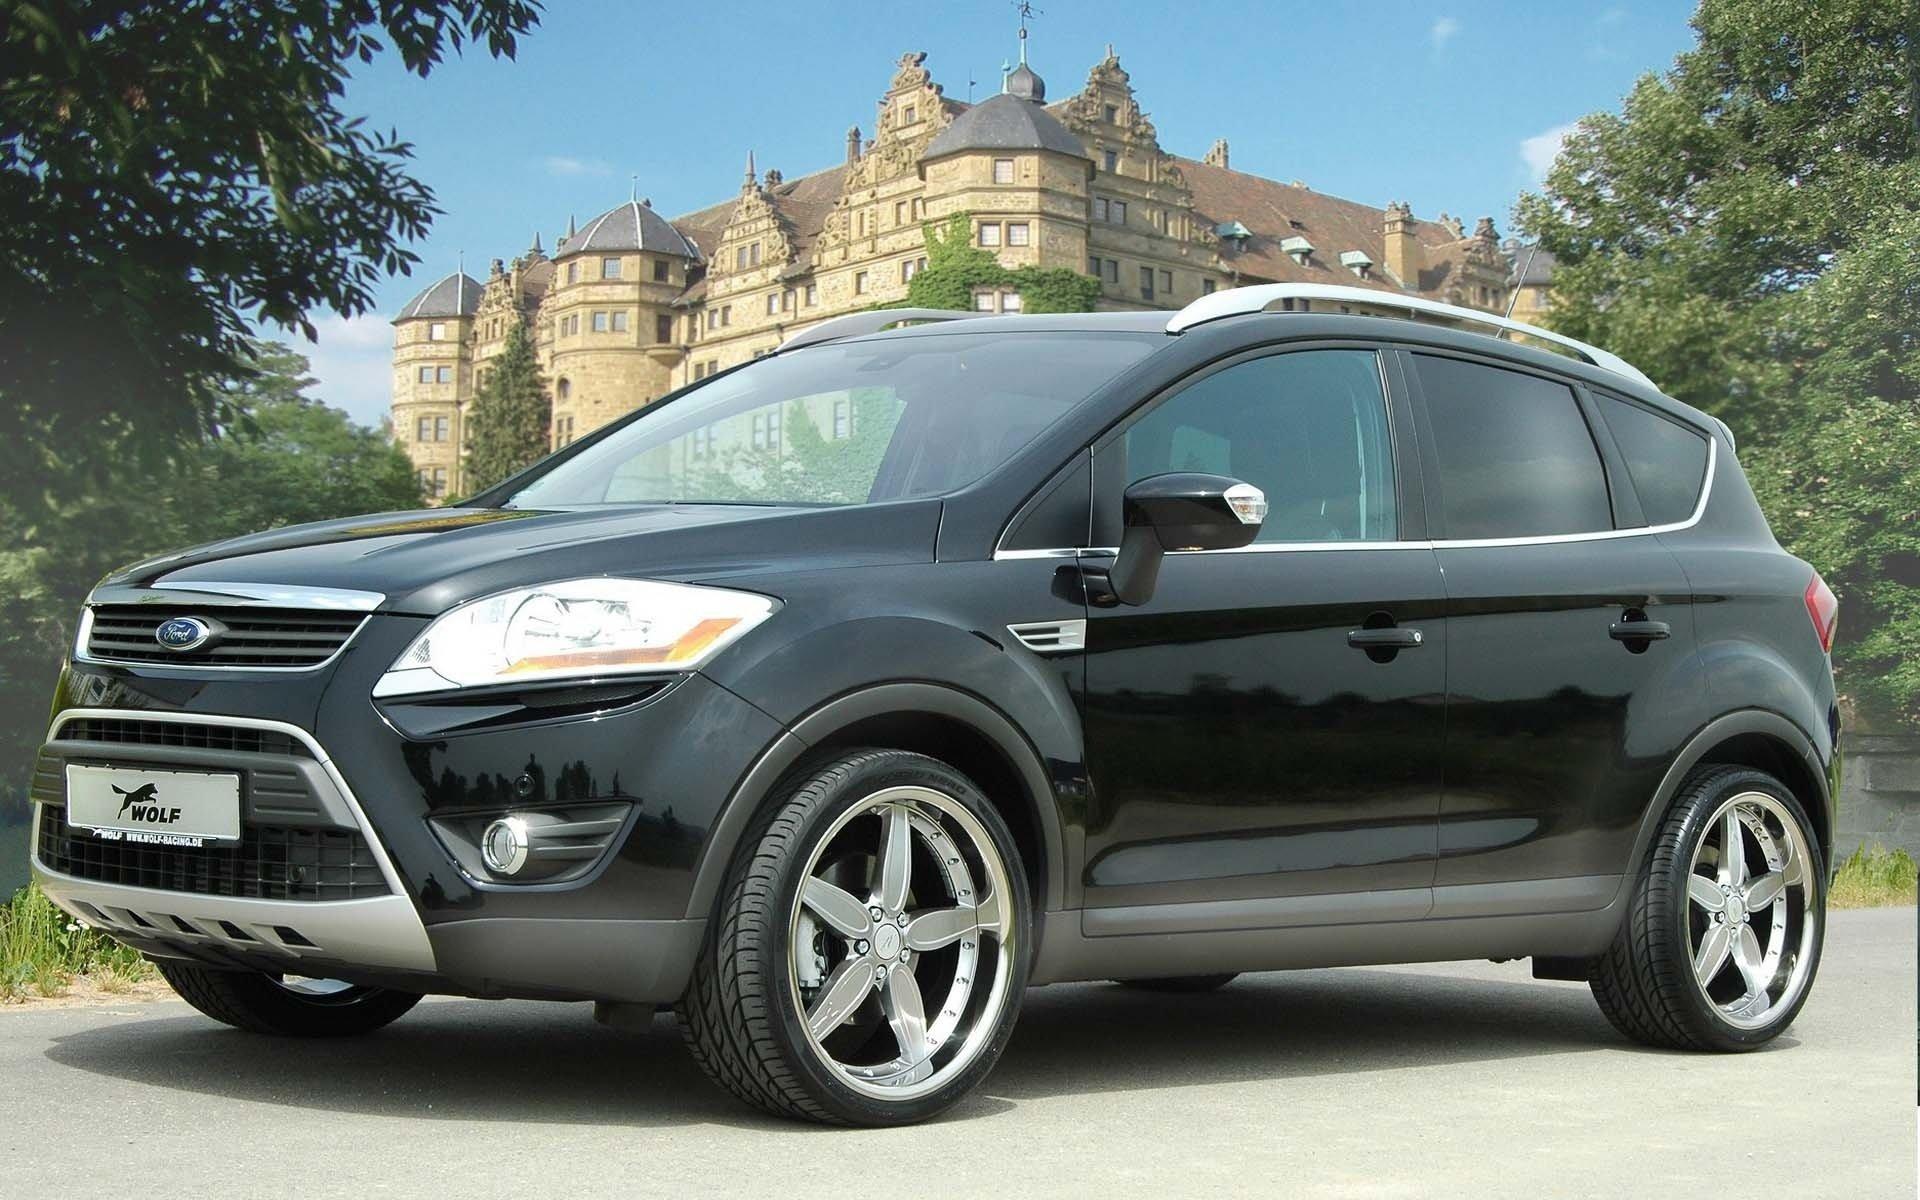 Ford Kuga HD Wallpaper and Background Image